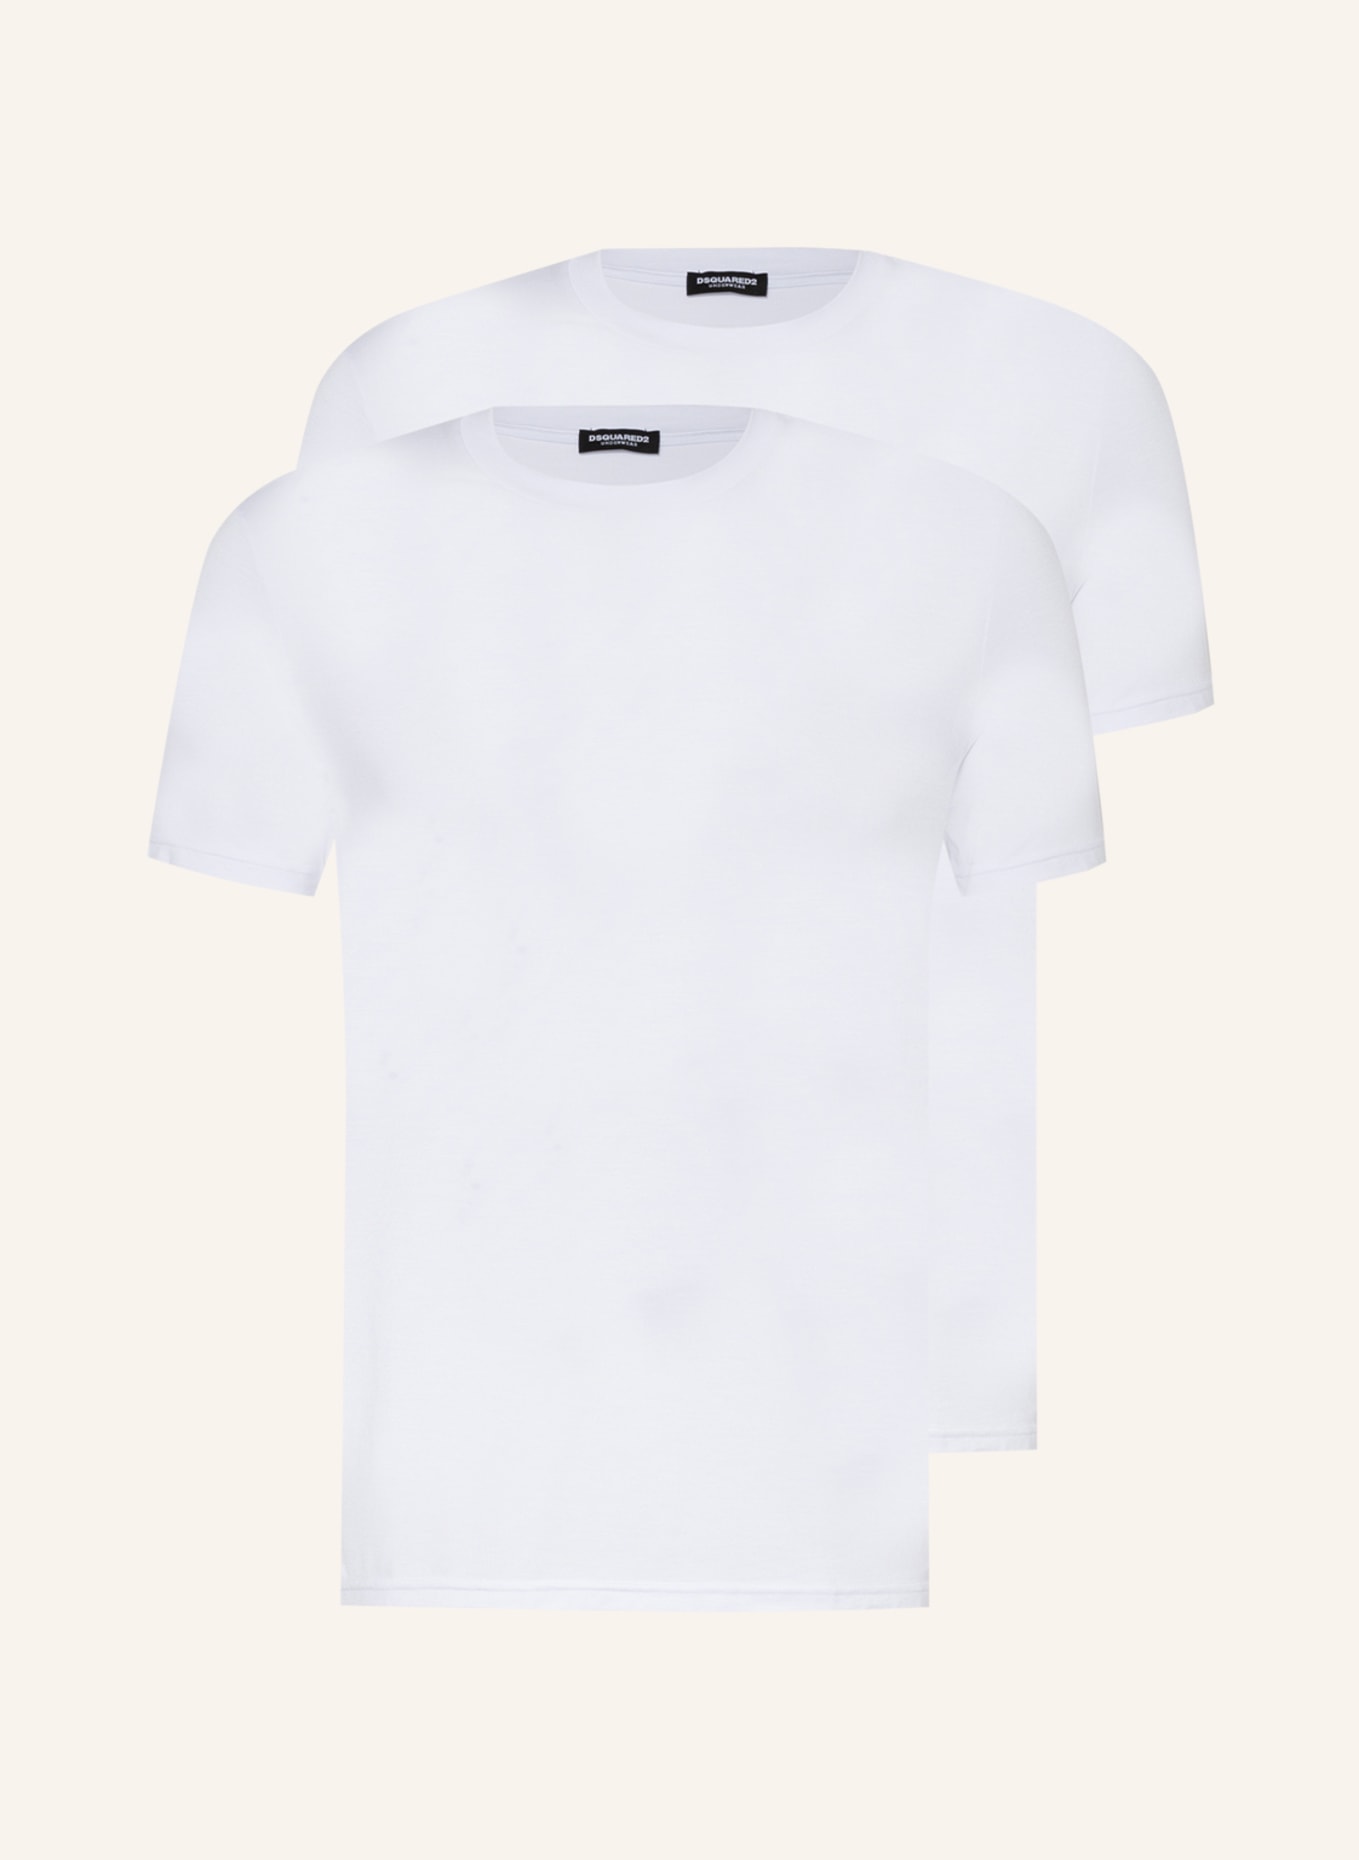 DSQUARED2 2-pack T-shirts , Color: WHITE (Image 2)